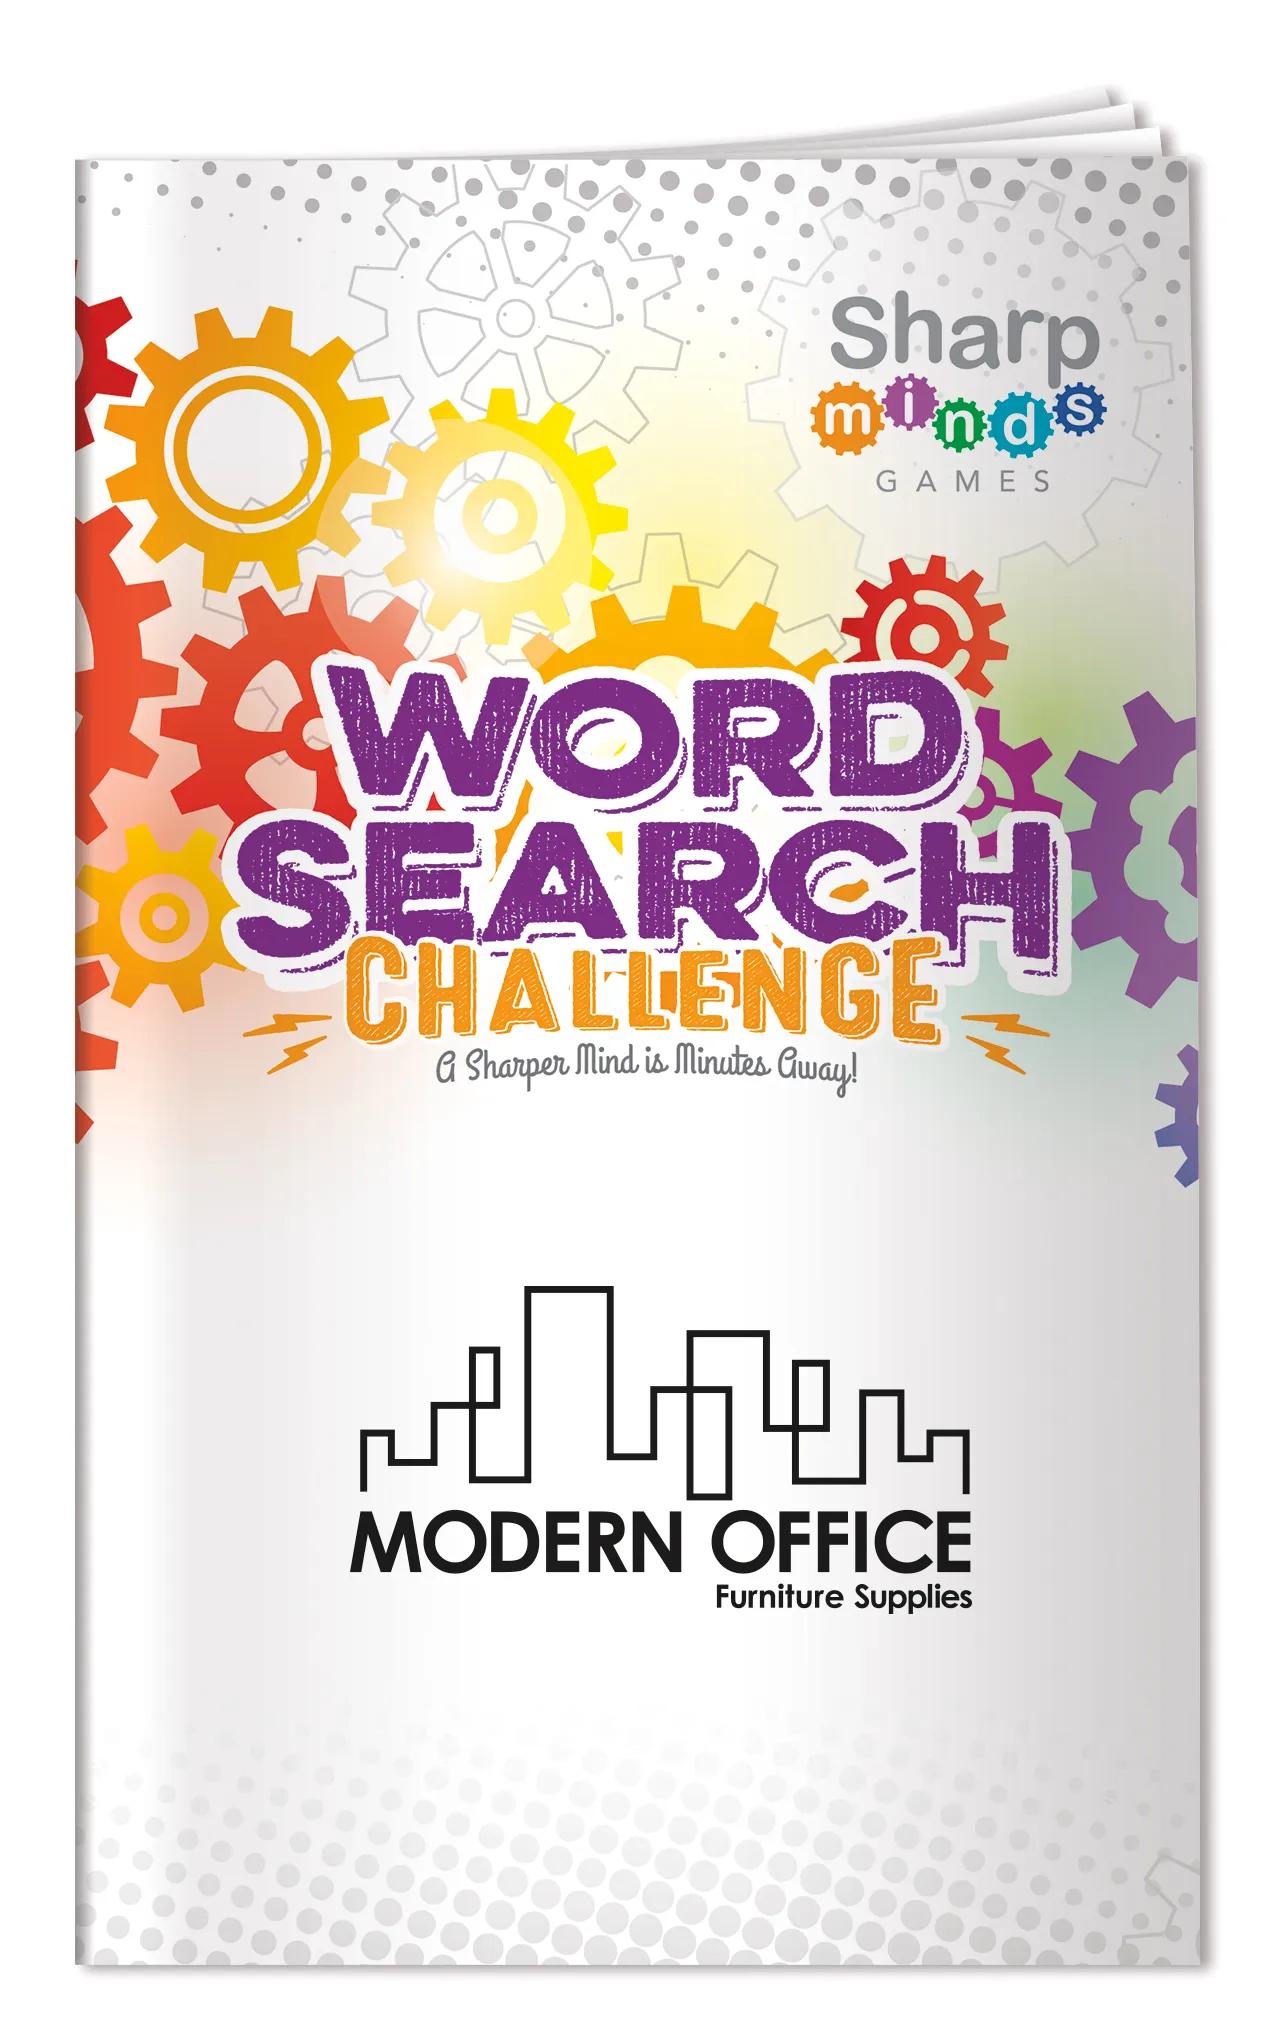 Sharp Minds Games: Word Searches Challenge 8 of 8